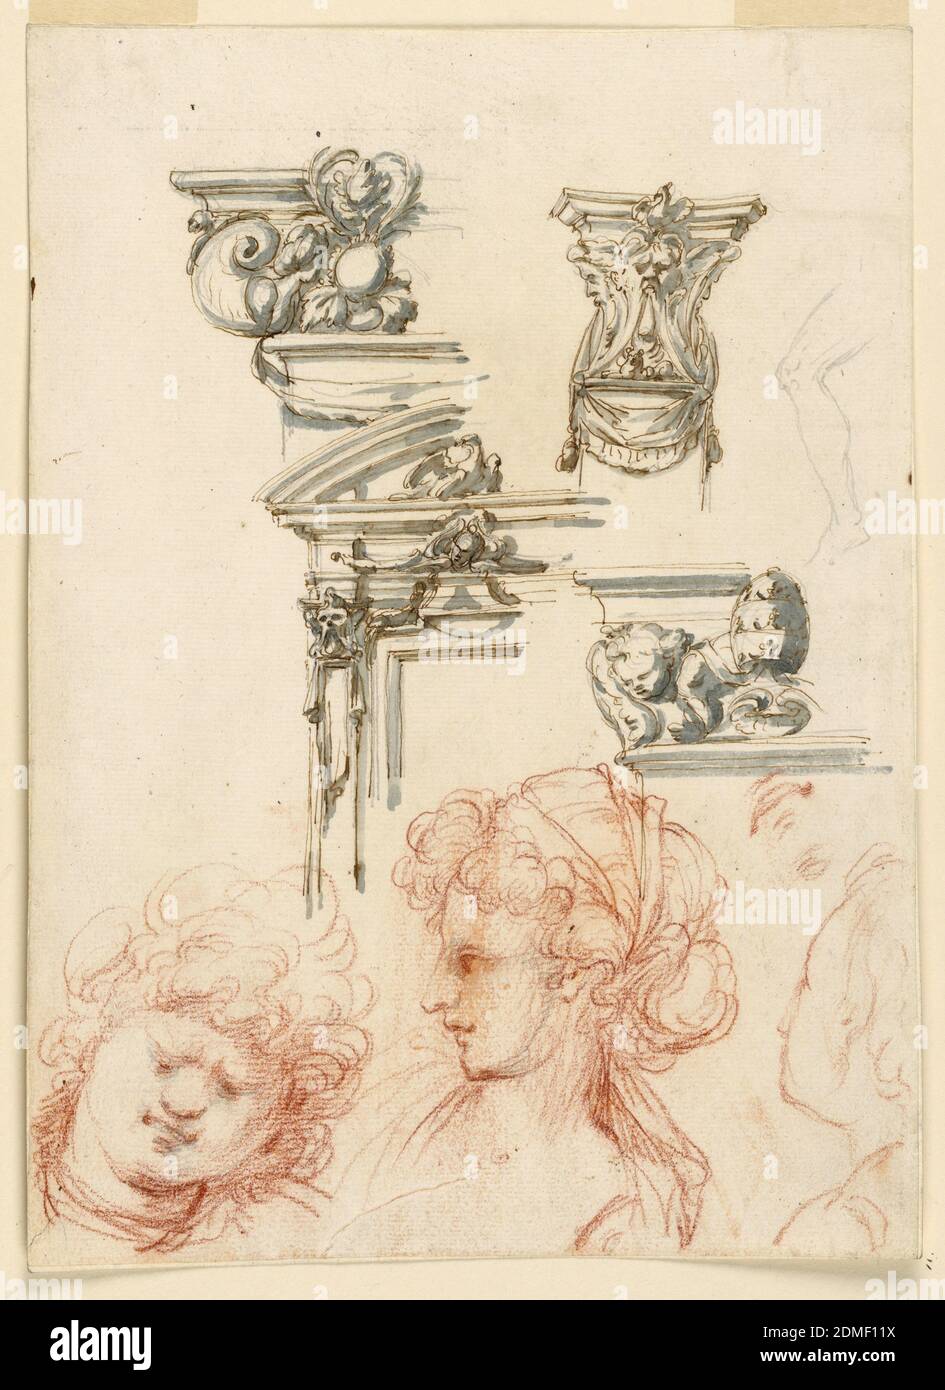 Architectural Details and Three heads, Filippo Marchionni, Italian, 1732–1805, Black, red chalk, pen and ink, brush and gray watercolor on laid paper, Top left: elevation of upper left corner of a building; part of a window pane, above which two friezes and cornices rise. A drapery festoon decorates the lower part with grotesque motif. Top right: a capital for a pilaster with masks forming the capital; a part of left leg of a seated man. Center right: left side of a frieze with a tiara over a shell flanked by cherubim. Bottom: three heads of women; left one is lowered Stock Photo